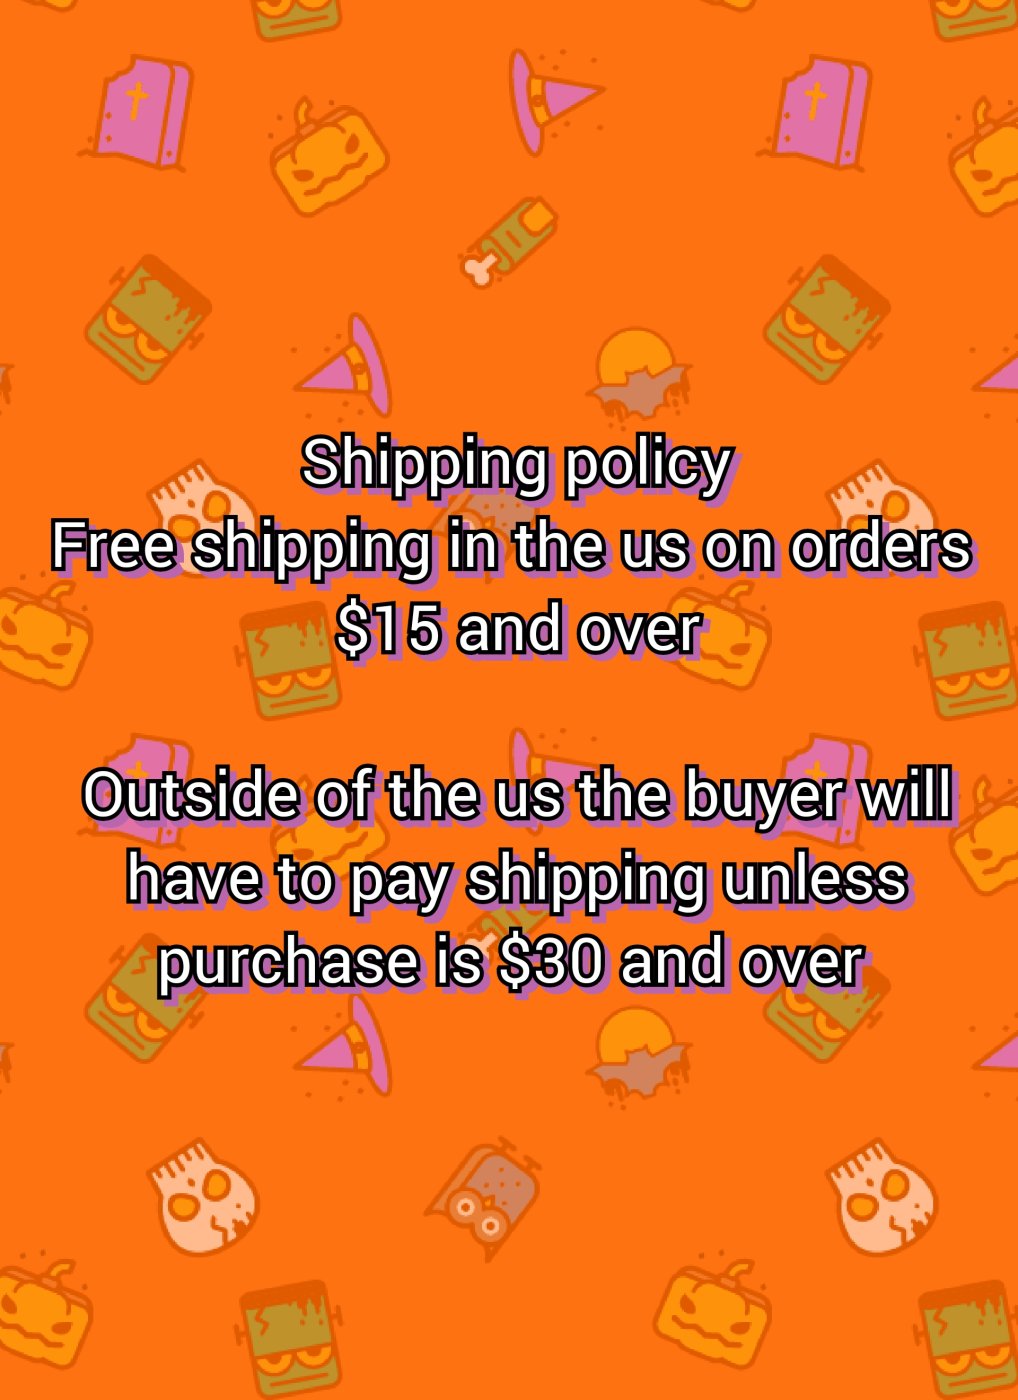 Shipping policy updated 10/19/22